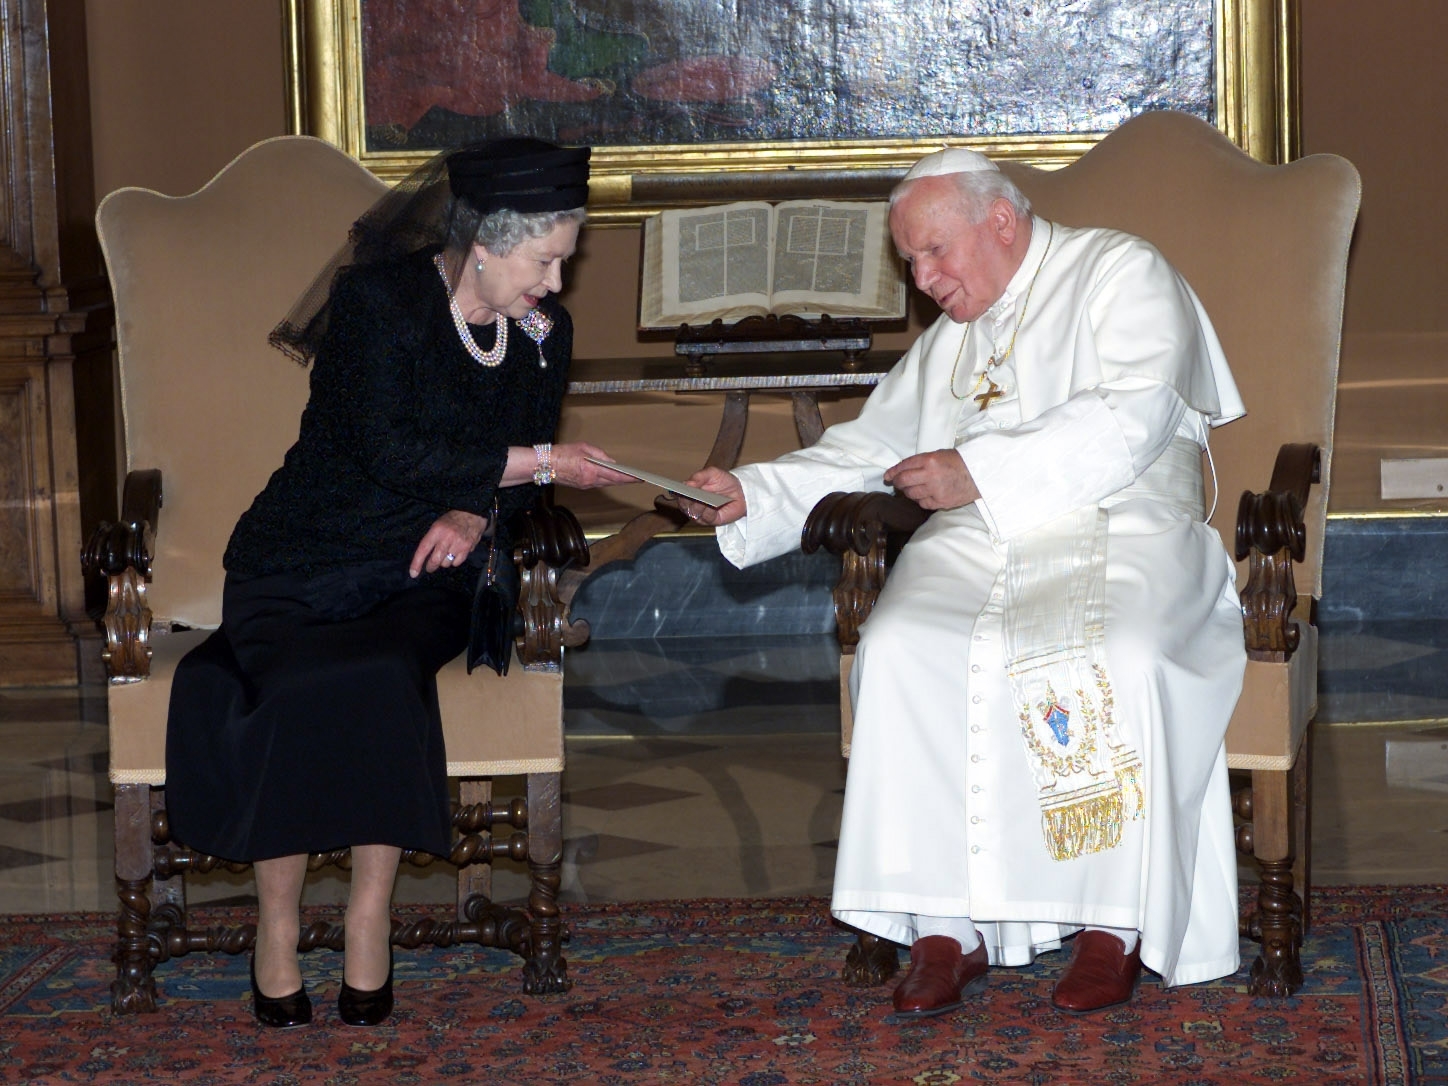 Queen Elizabeth II exchanges letters with with Pope John  Paul II during an audience at the Vatican in Rome, Italy, Tuesday October 17, 2000. Dressed in black and wearing a veil, the Queen was greeted by the 80-year-old leader of the Roman Catholic Church at the door of his study. During a private meeting lasting 20 minutes, they are thought to have discussed progress towards Christian unity and the troubles in Northern Ireland.  The Queen arrived in Rome Monday at the start of four day State visit to Italy. 